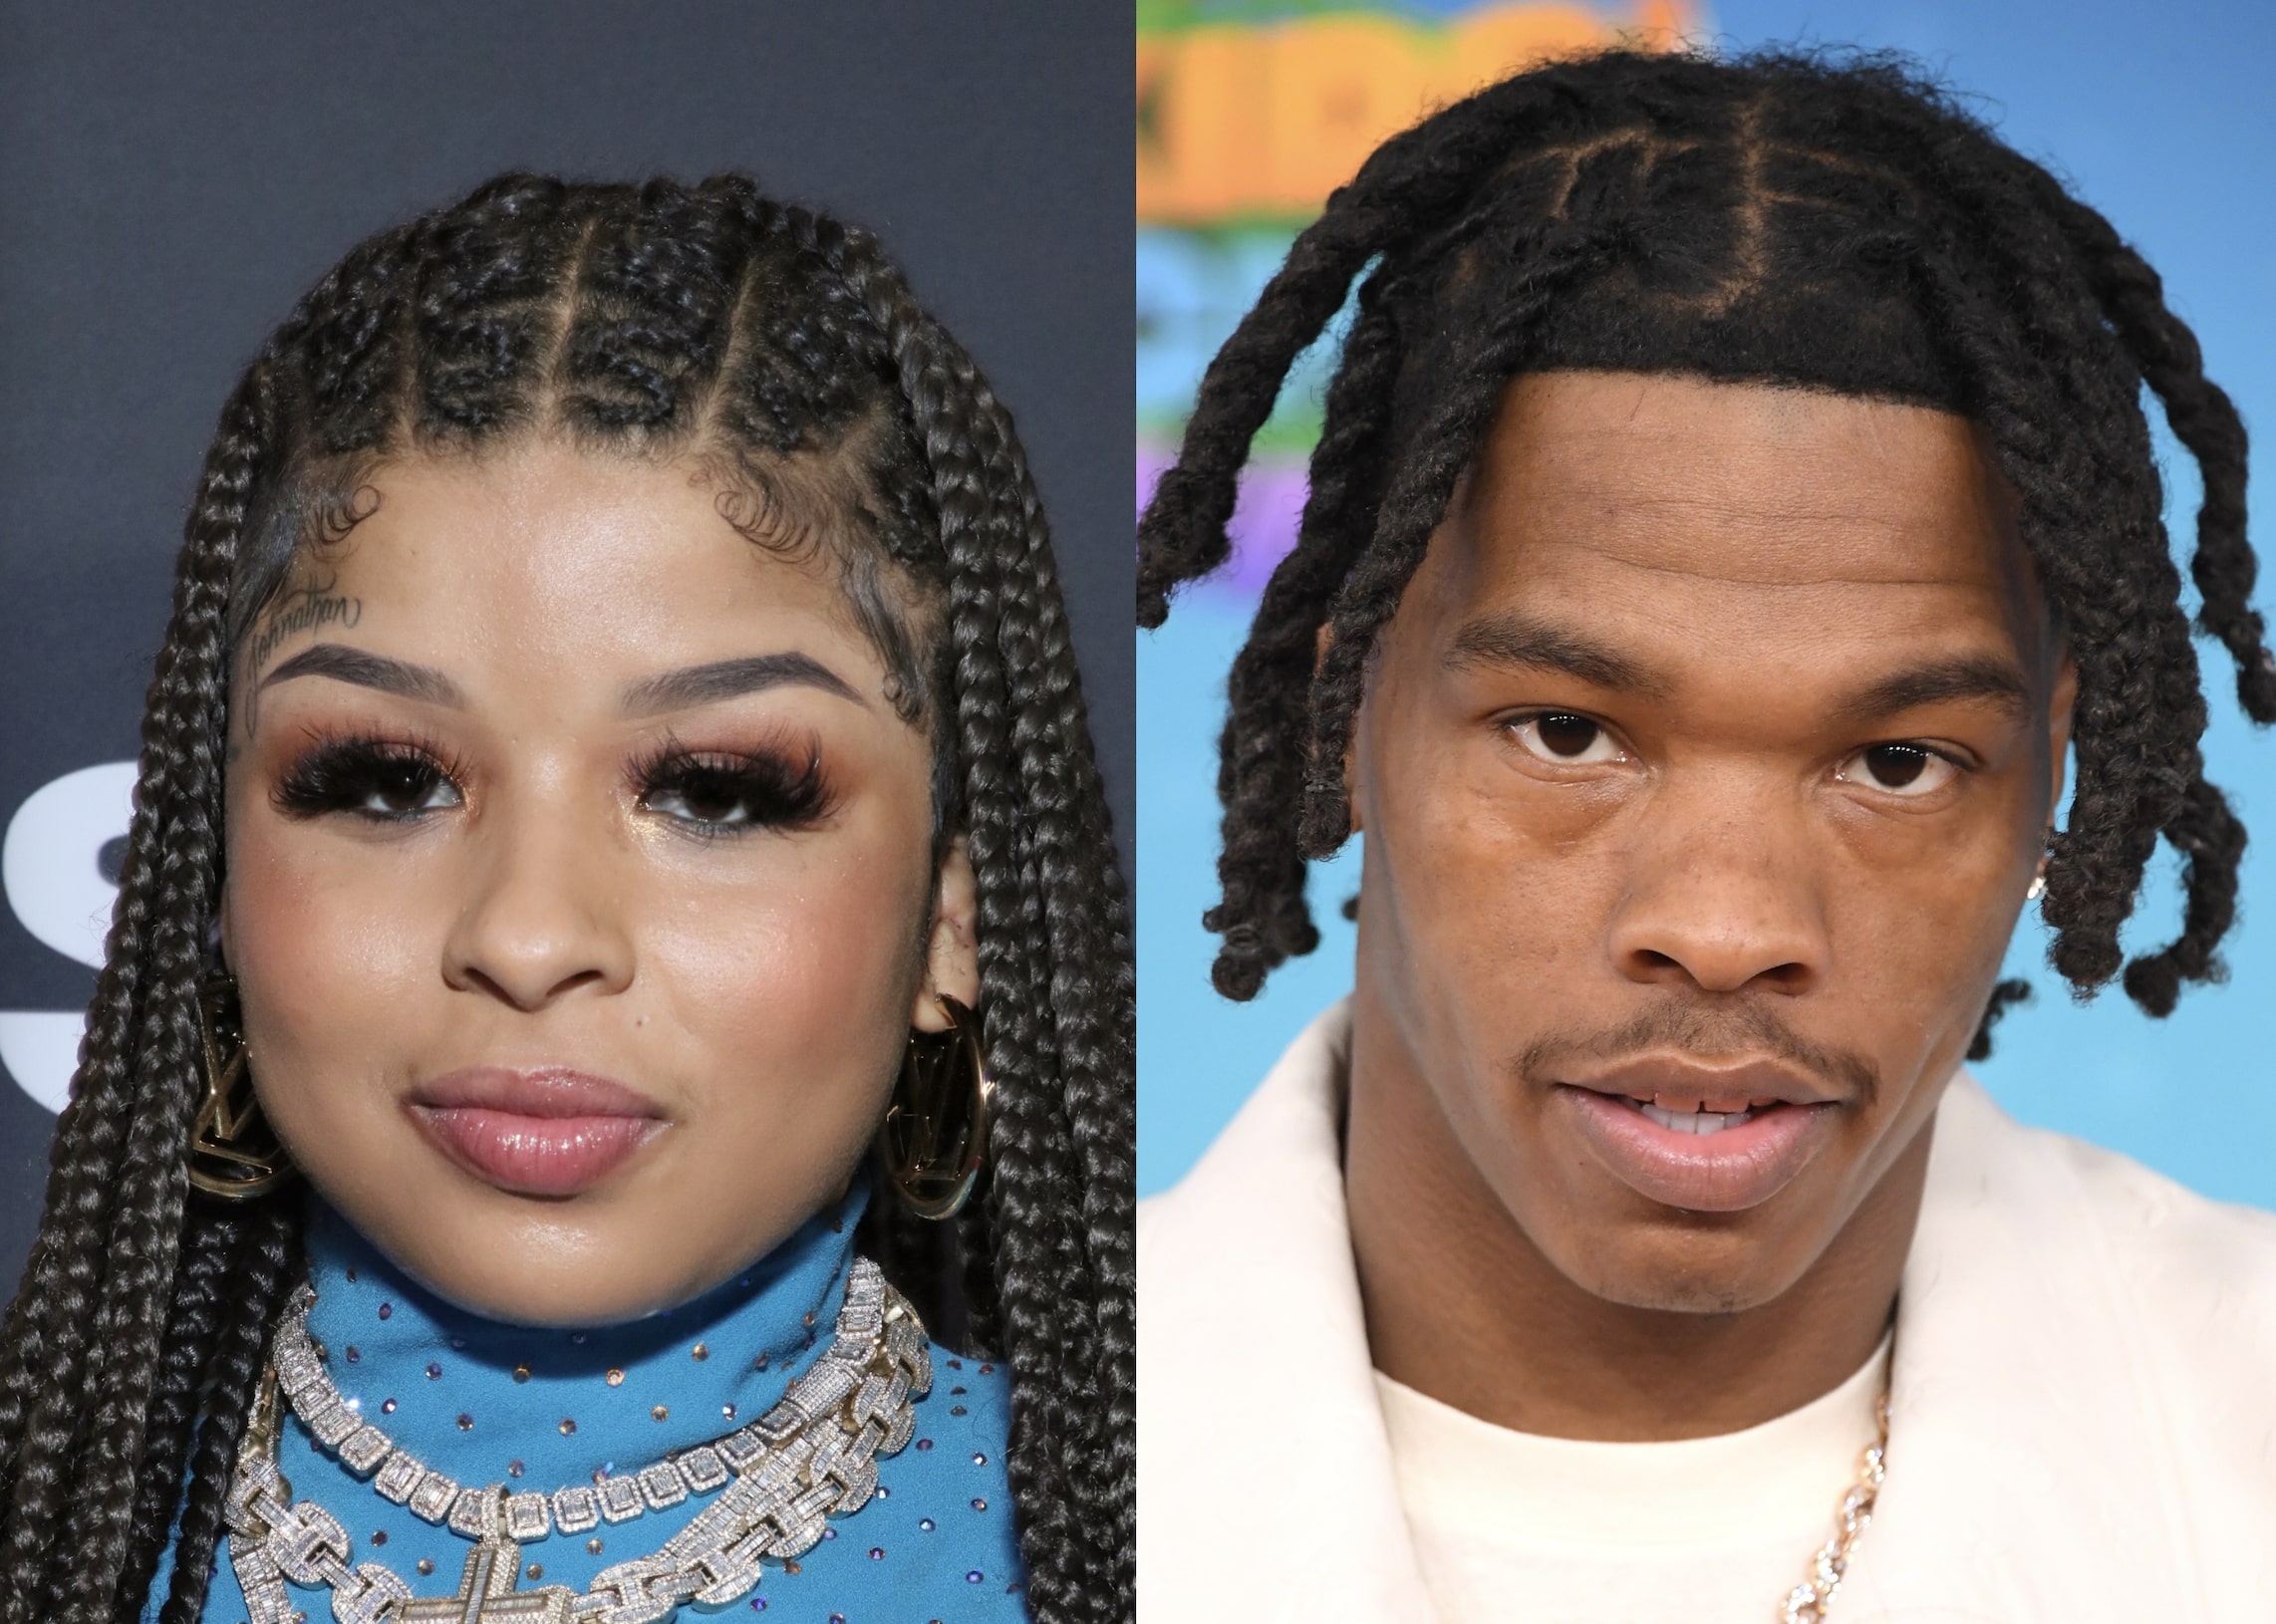 Chrisean Rock Praises Lil Baby After Blueface Calls Her Sister Tesehki “A Real One”